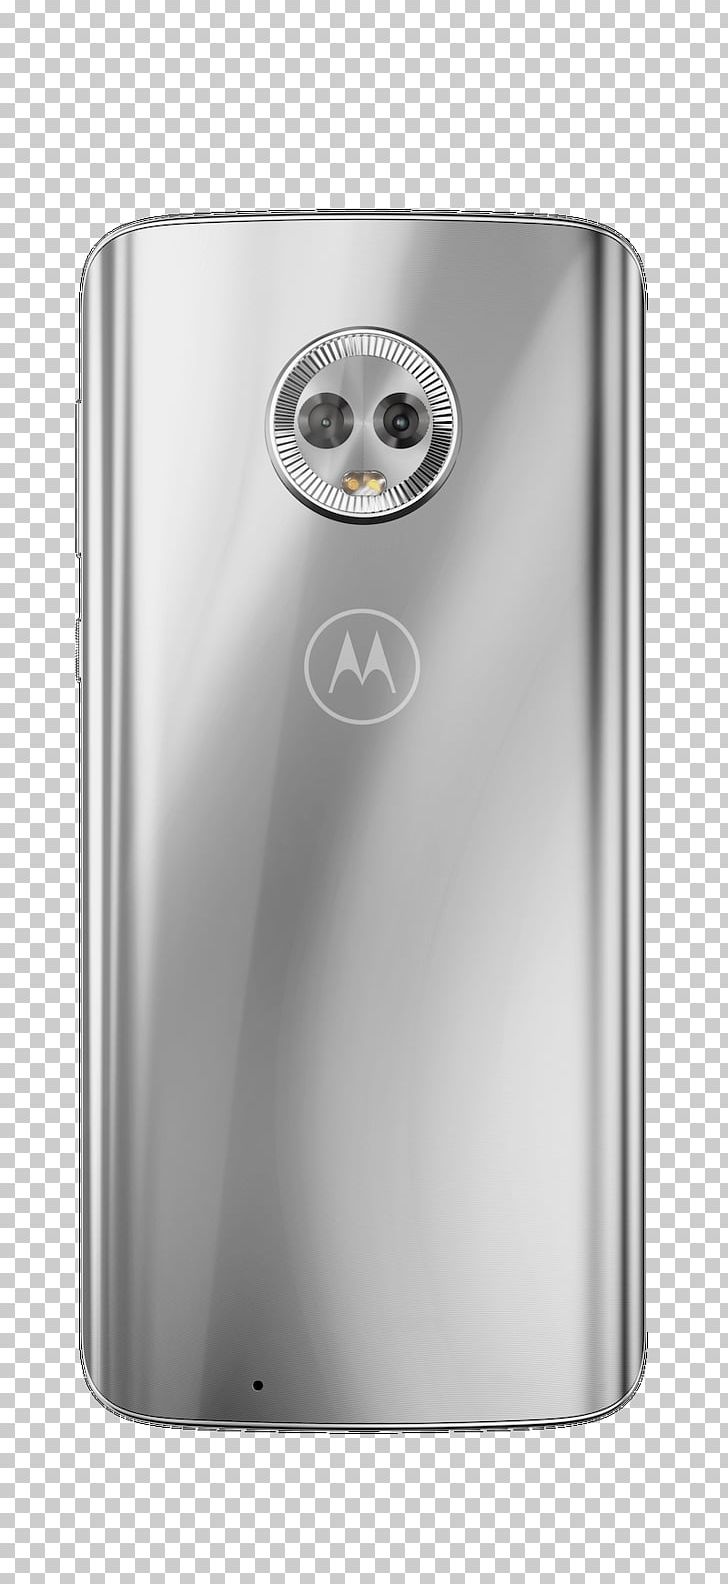 Motorola Moto G6 Plus Moto G5 Smartphone PNG, Clipart, Communication Device, Electronic Device, Gadget, Mobile Phone, Mobile Phones Free PNG Download